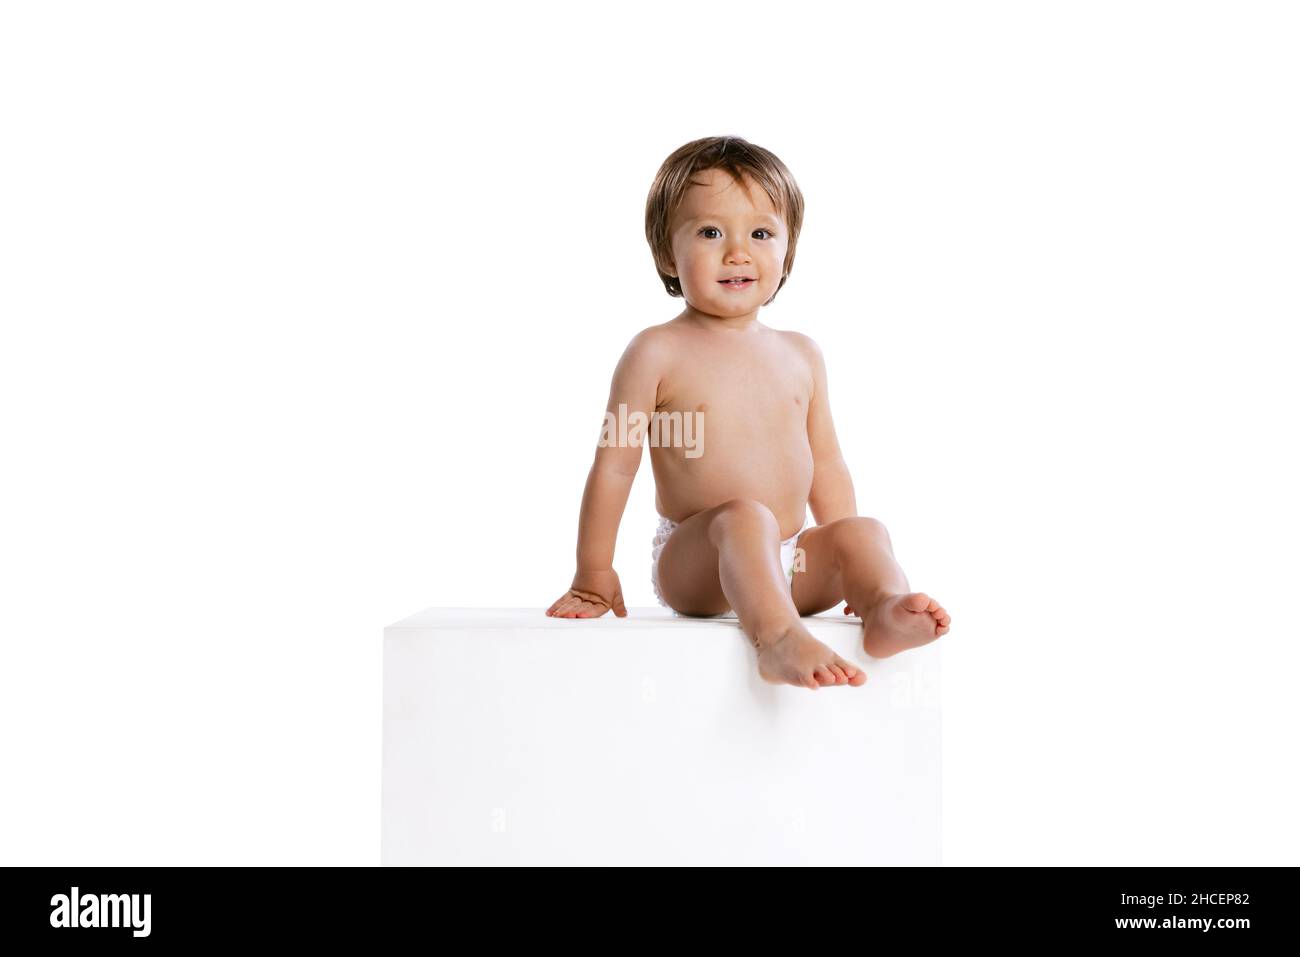 Shy Cute Baby Boy in Diapers Stock Photo - Image of studio